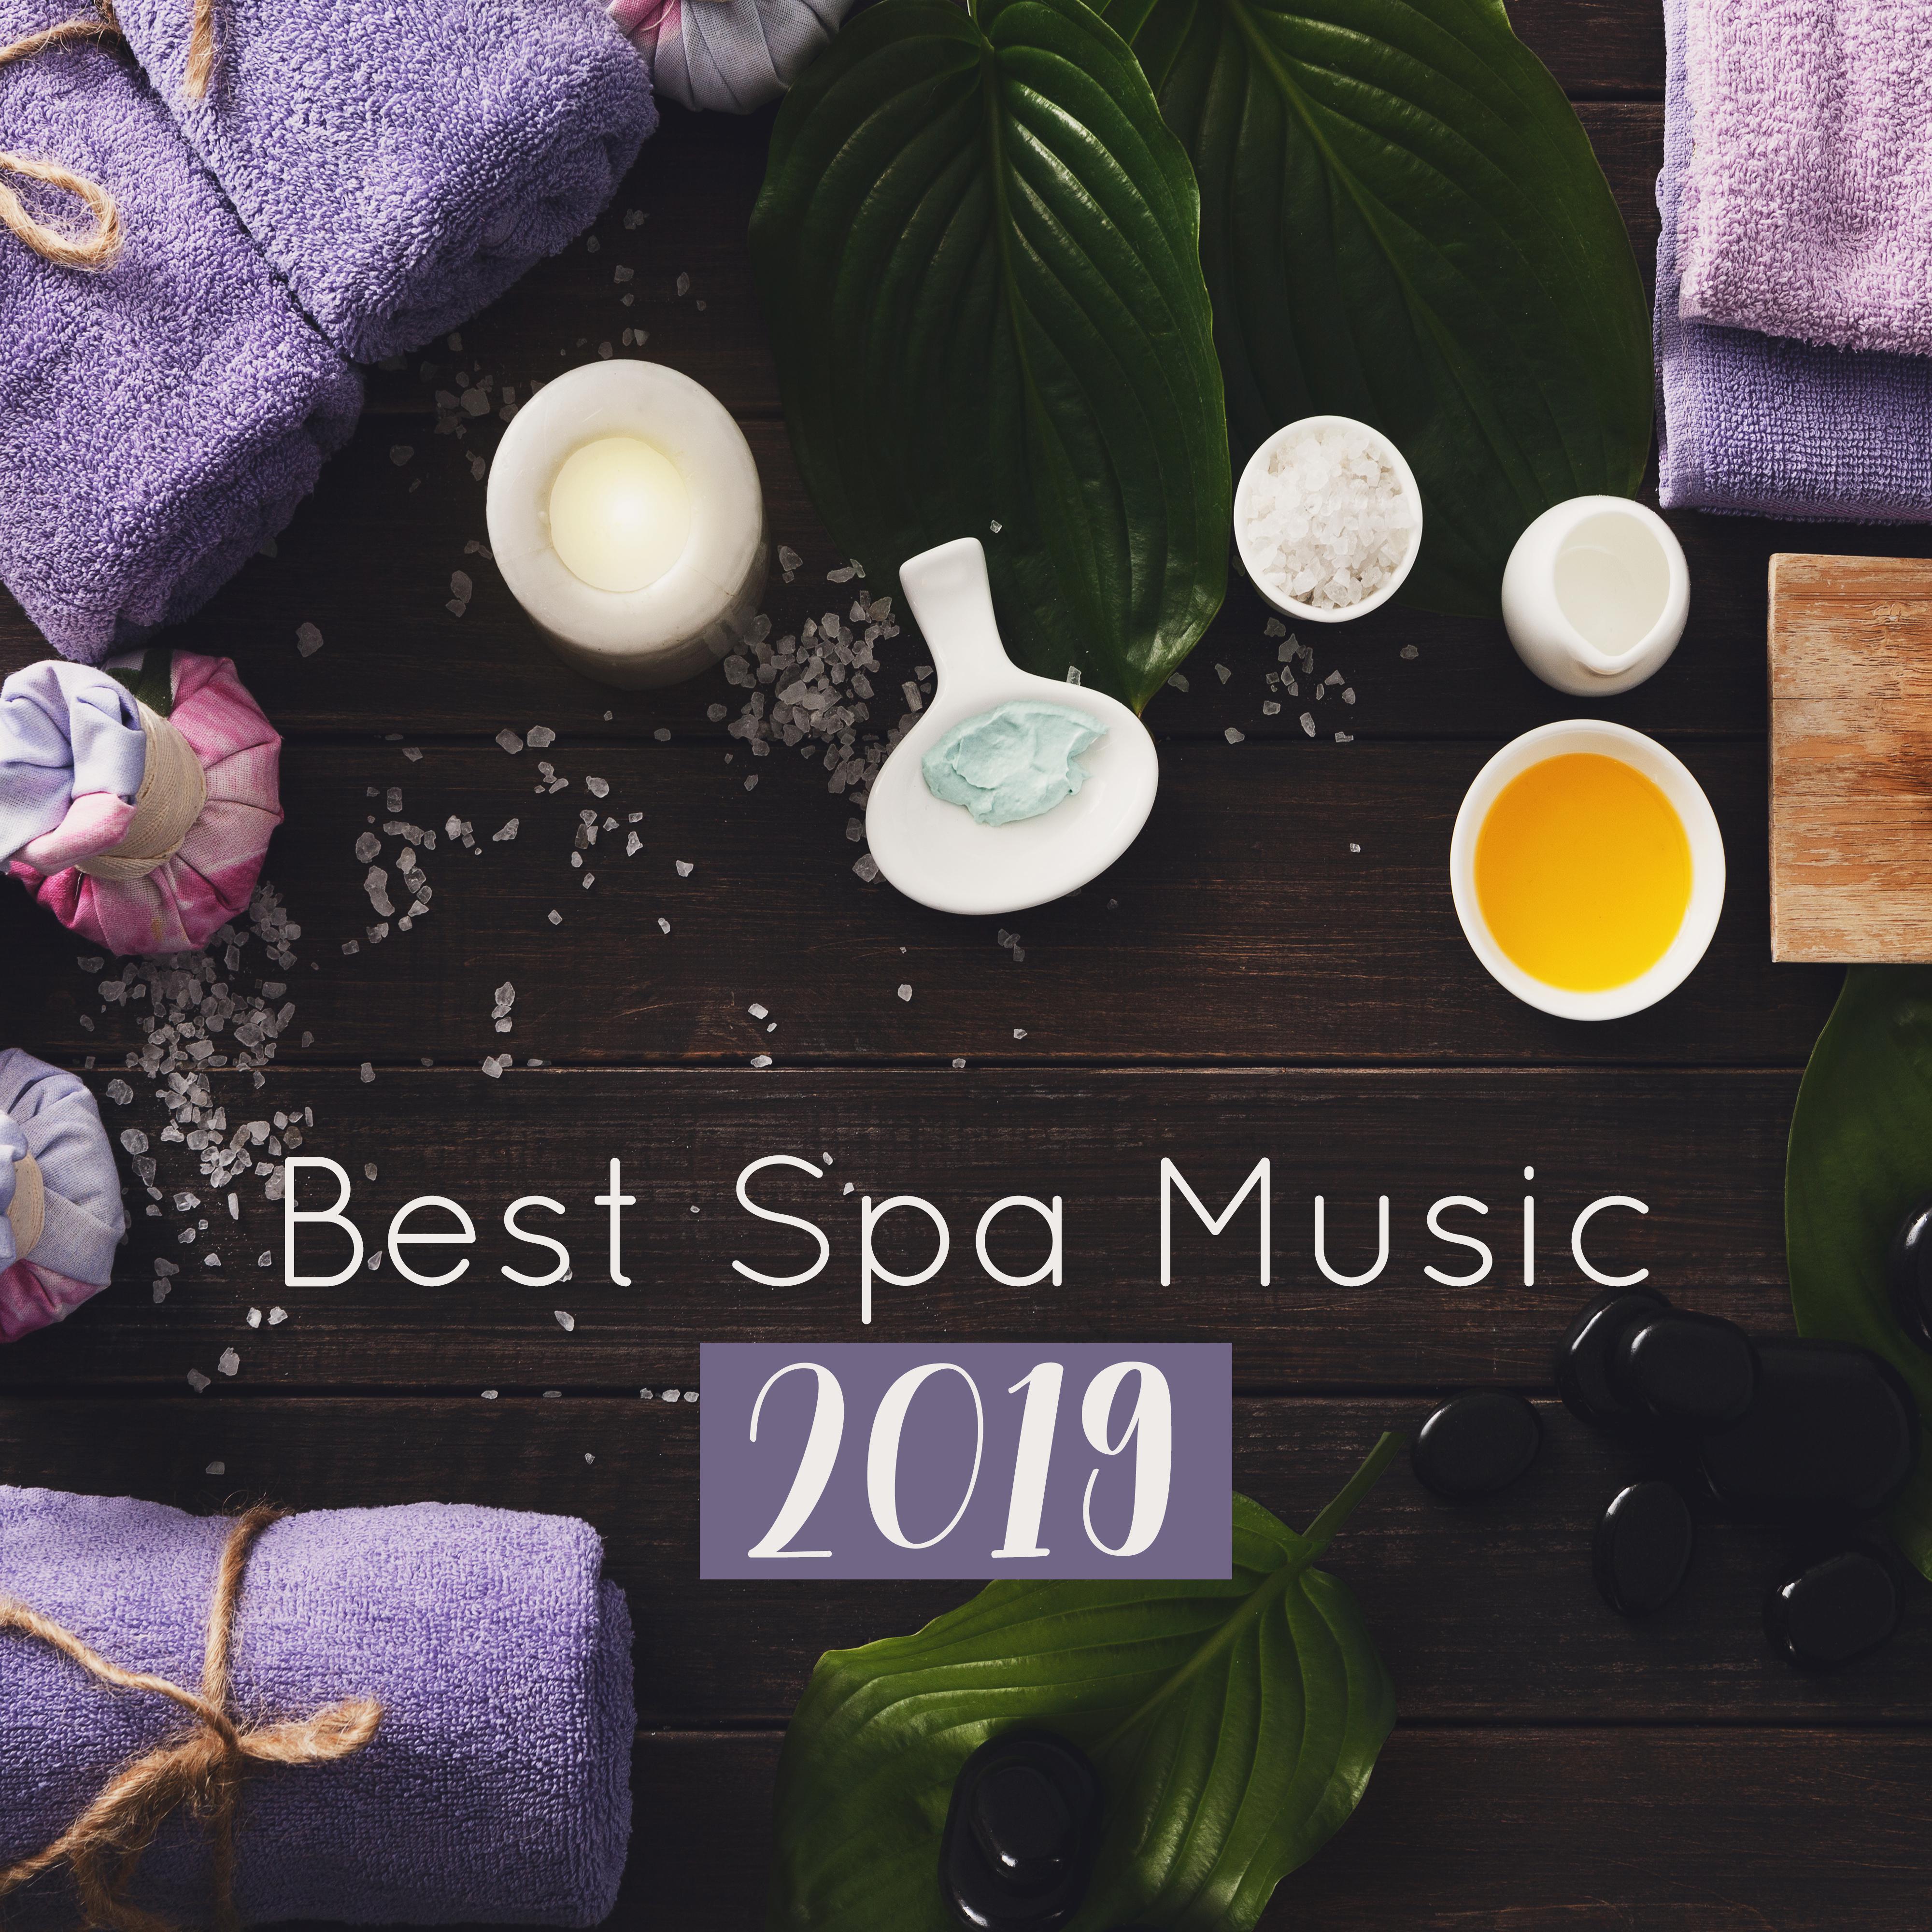 Best Spa Music 2019: Sounds of Nature for Chillout, Bath Music for Time to Relax in Spa Hotel, Zen, Lounge, Spa Chillout, Ambient Music, Spa Massage, Inner Harmony